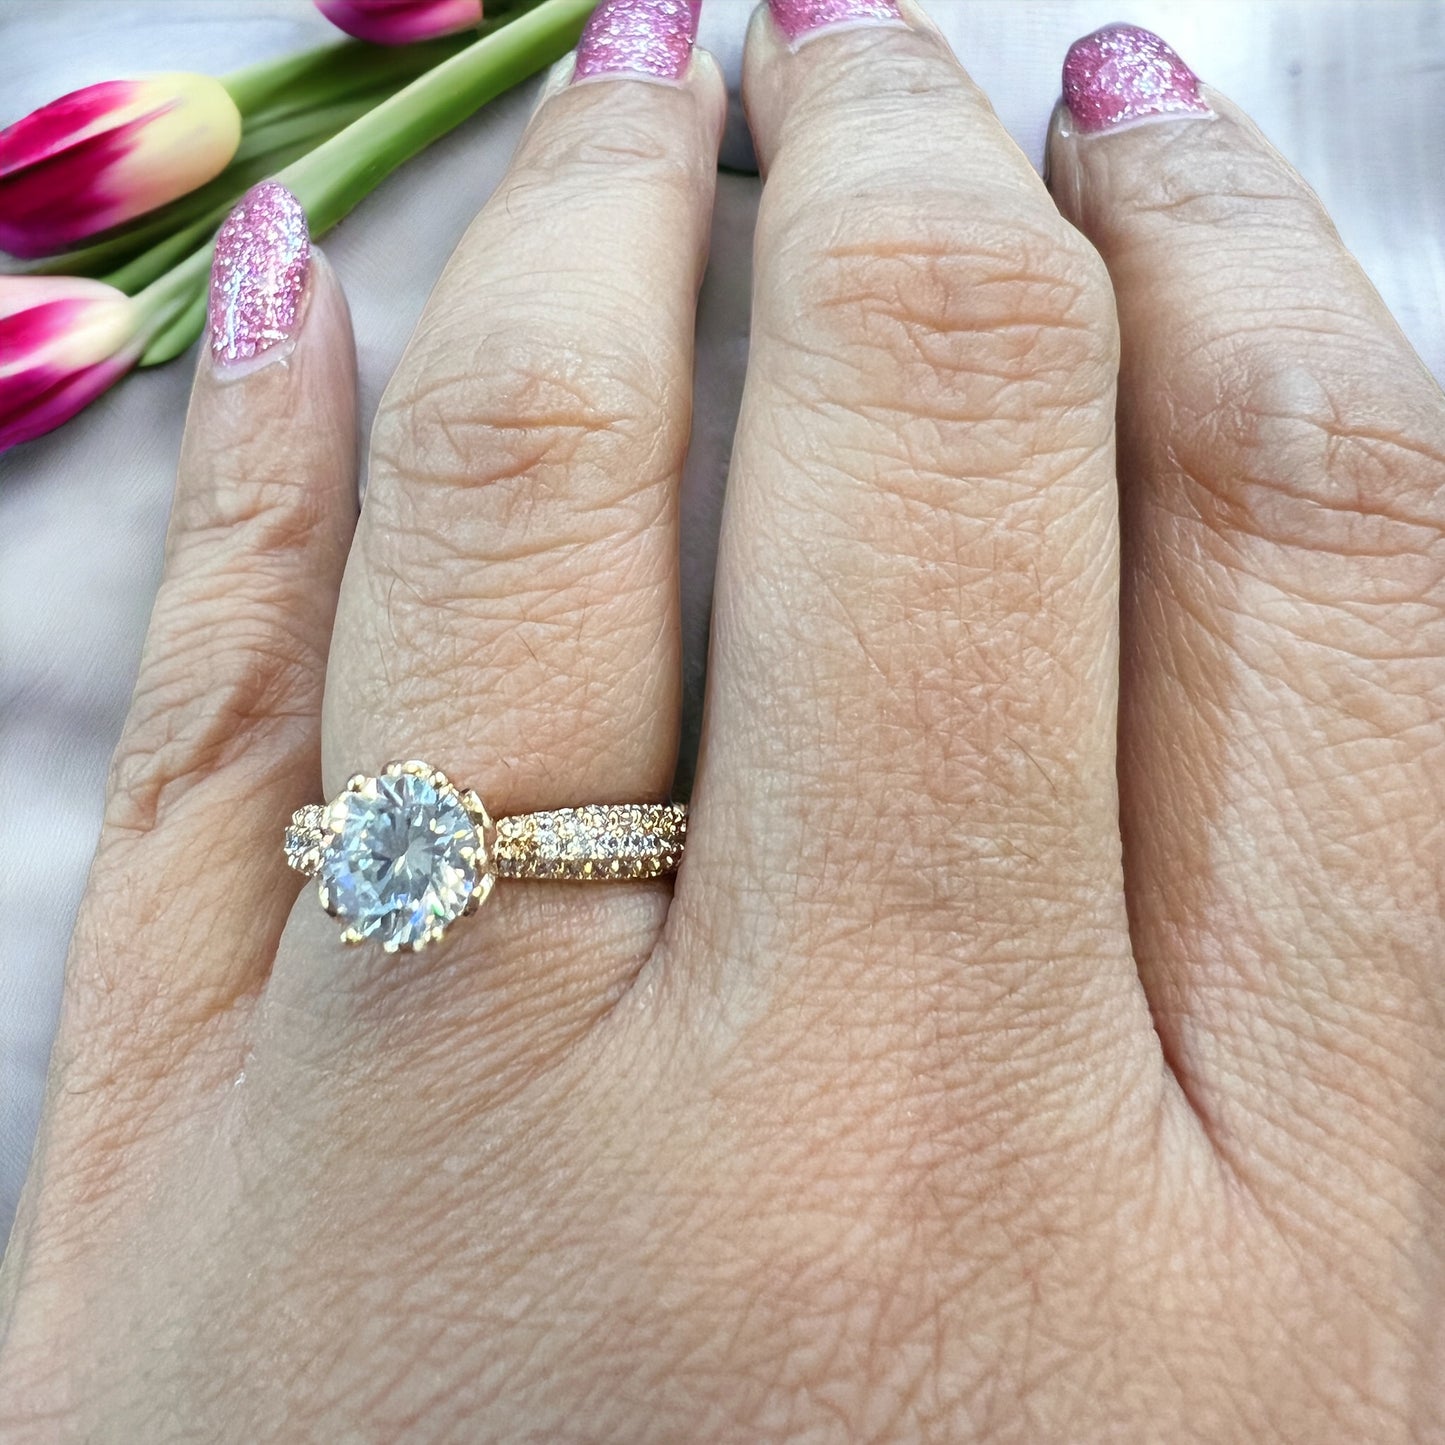 Enclave Elegance: White Cubic Zircon Stone with Embellished Band Gold-Plated Ring